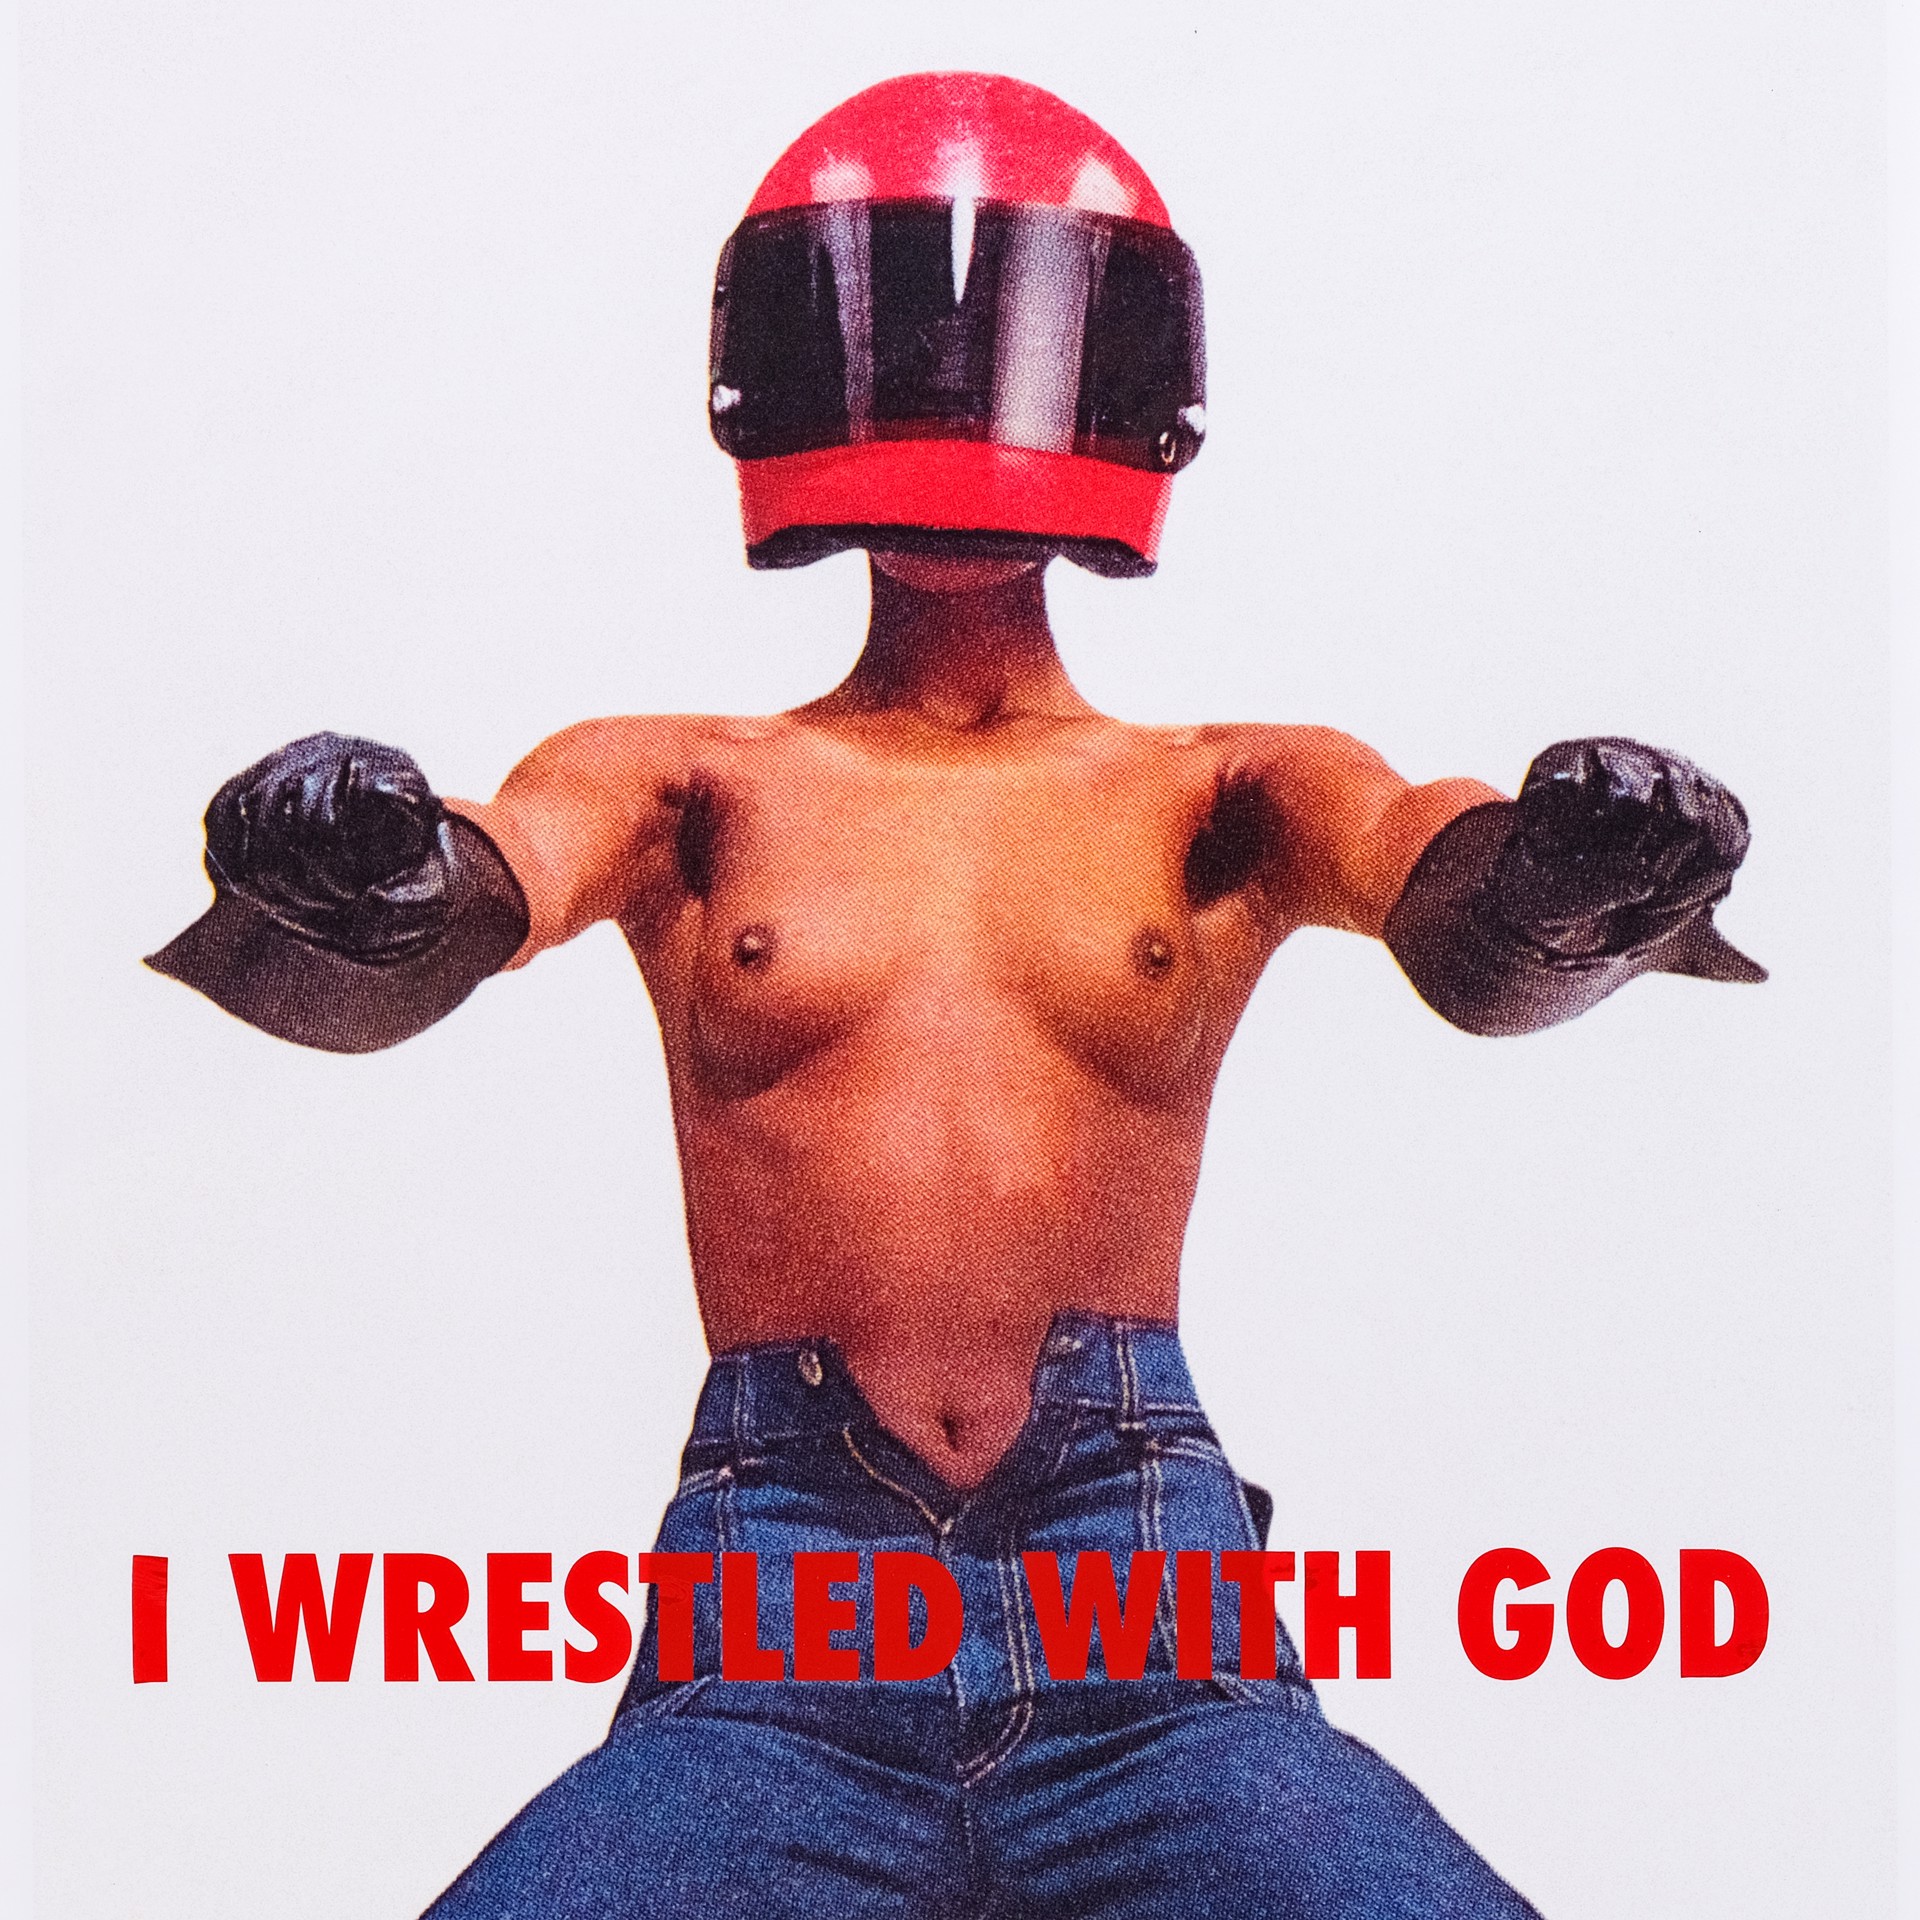 I wrestled with God by Reed Weily